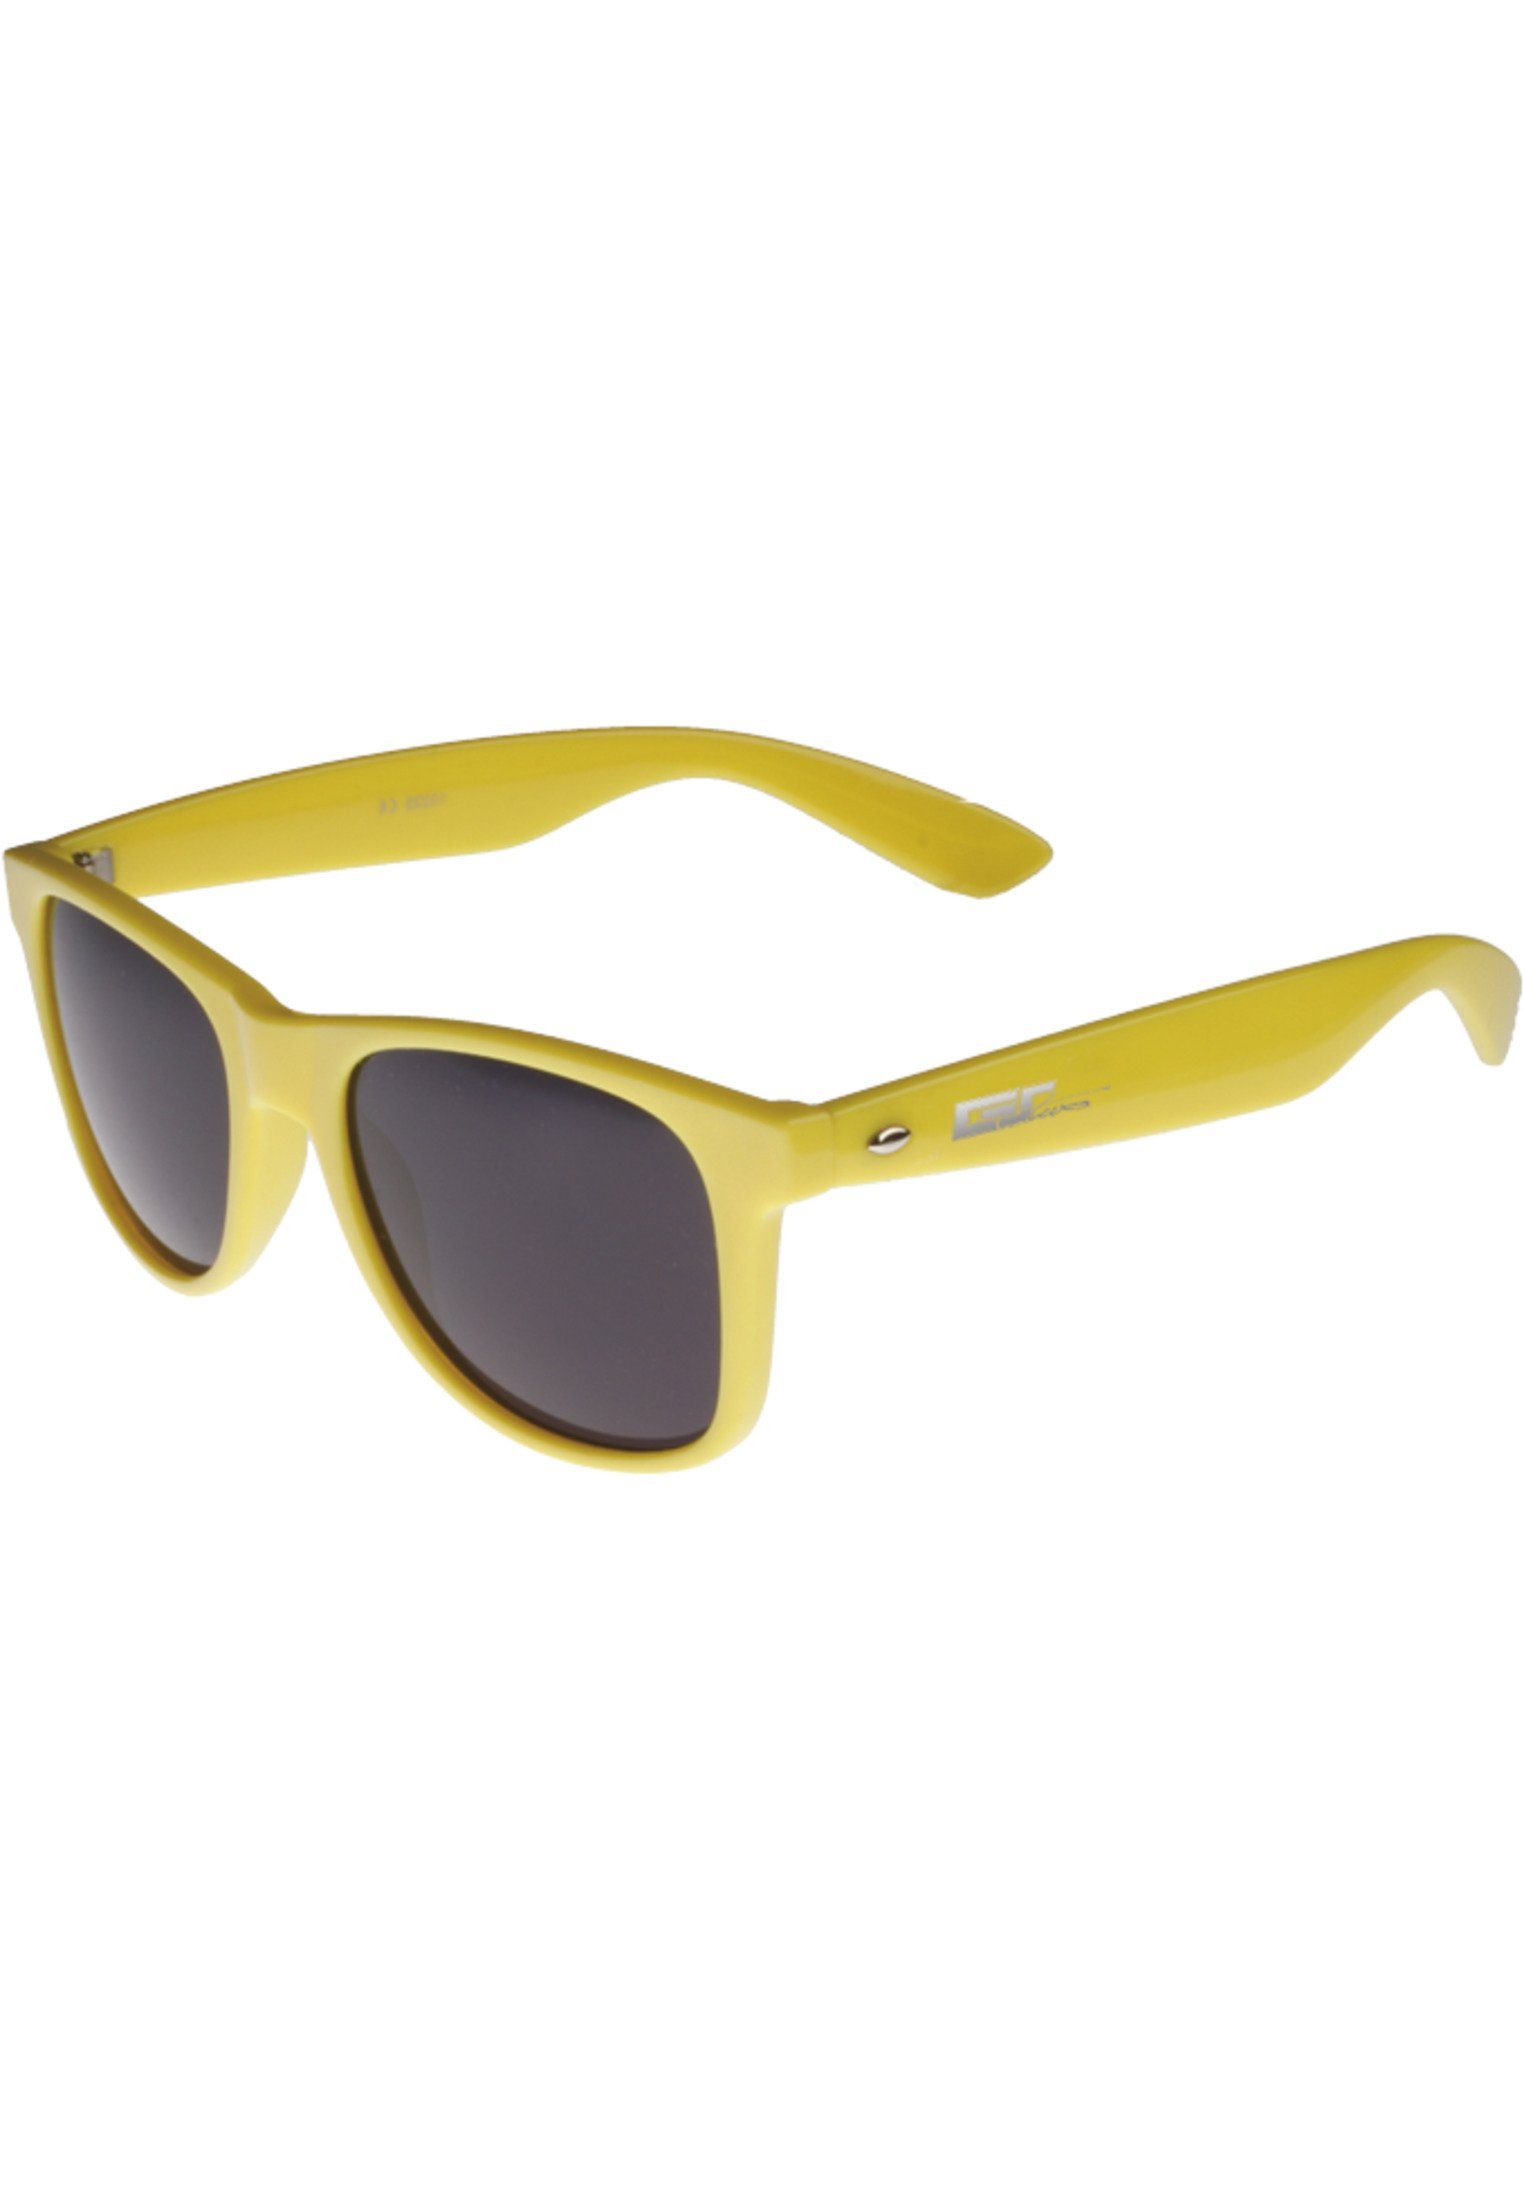 Accessoires GStwo Groove yellow Shades MSTRDS Sonnenbrille